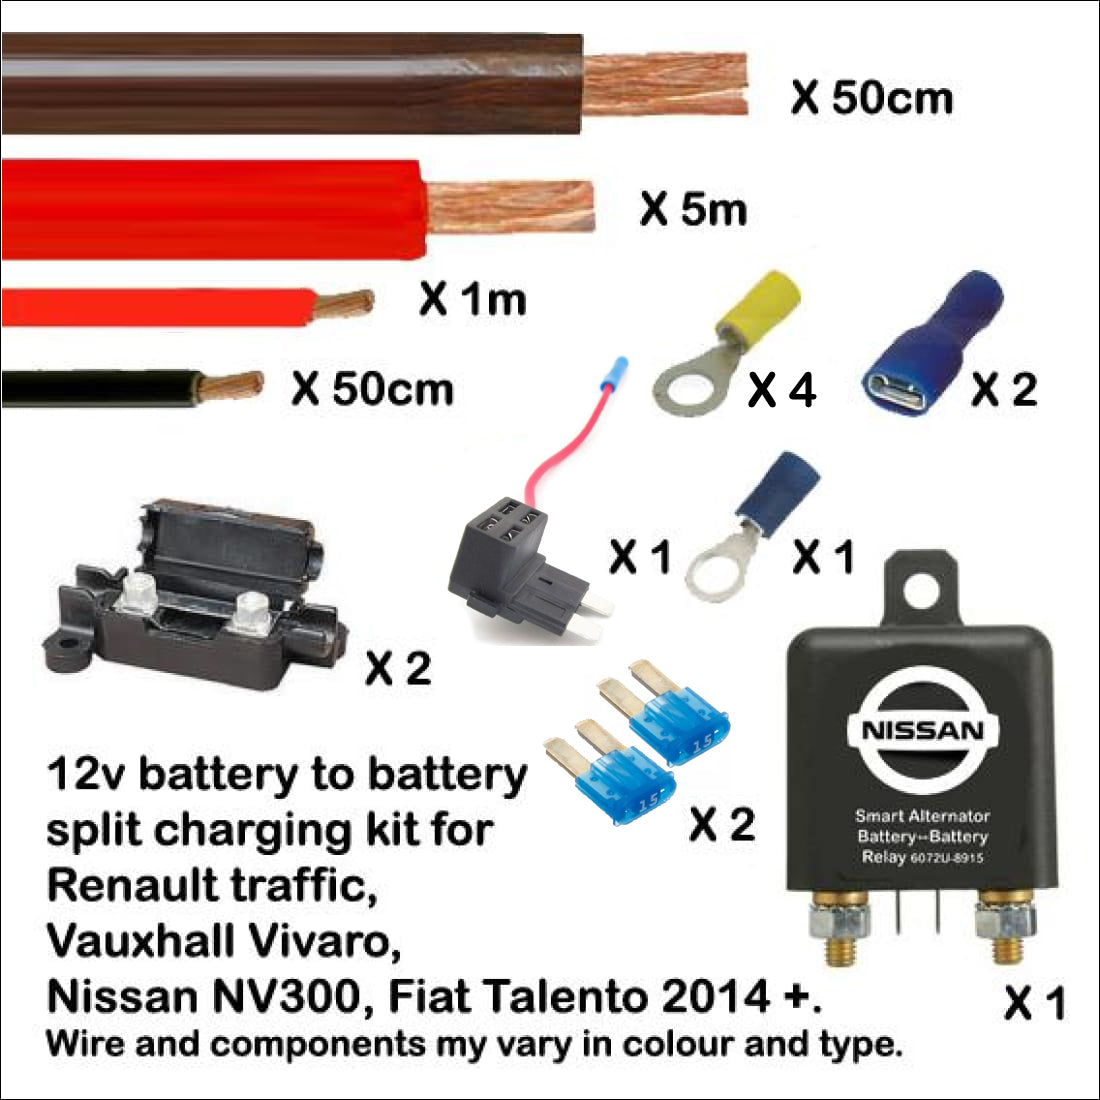 Renault Trafic or Vauxhall Vivaro Battery to Battery Split Charger Charging Energy Combiner Kit - cccampers.myshopify.com